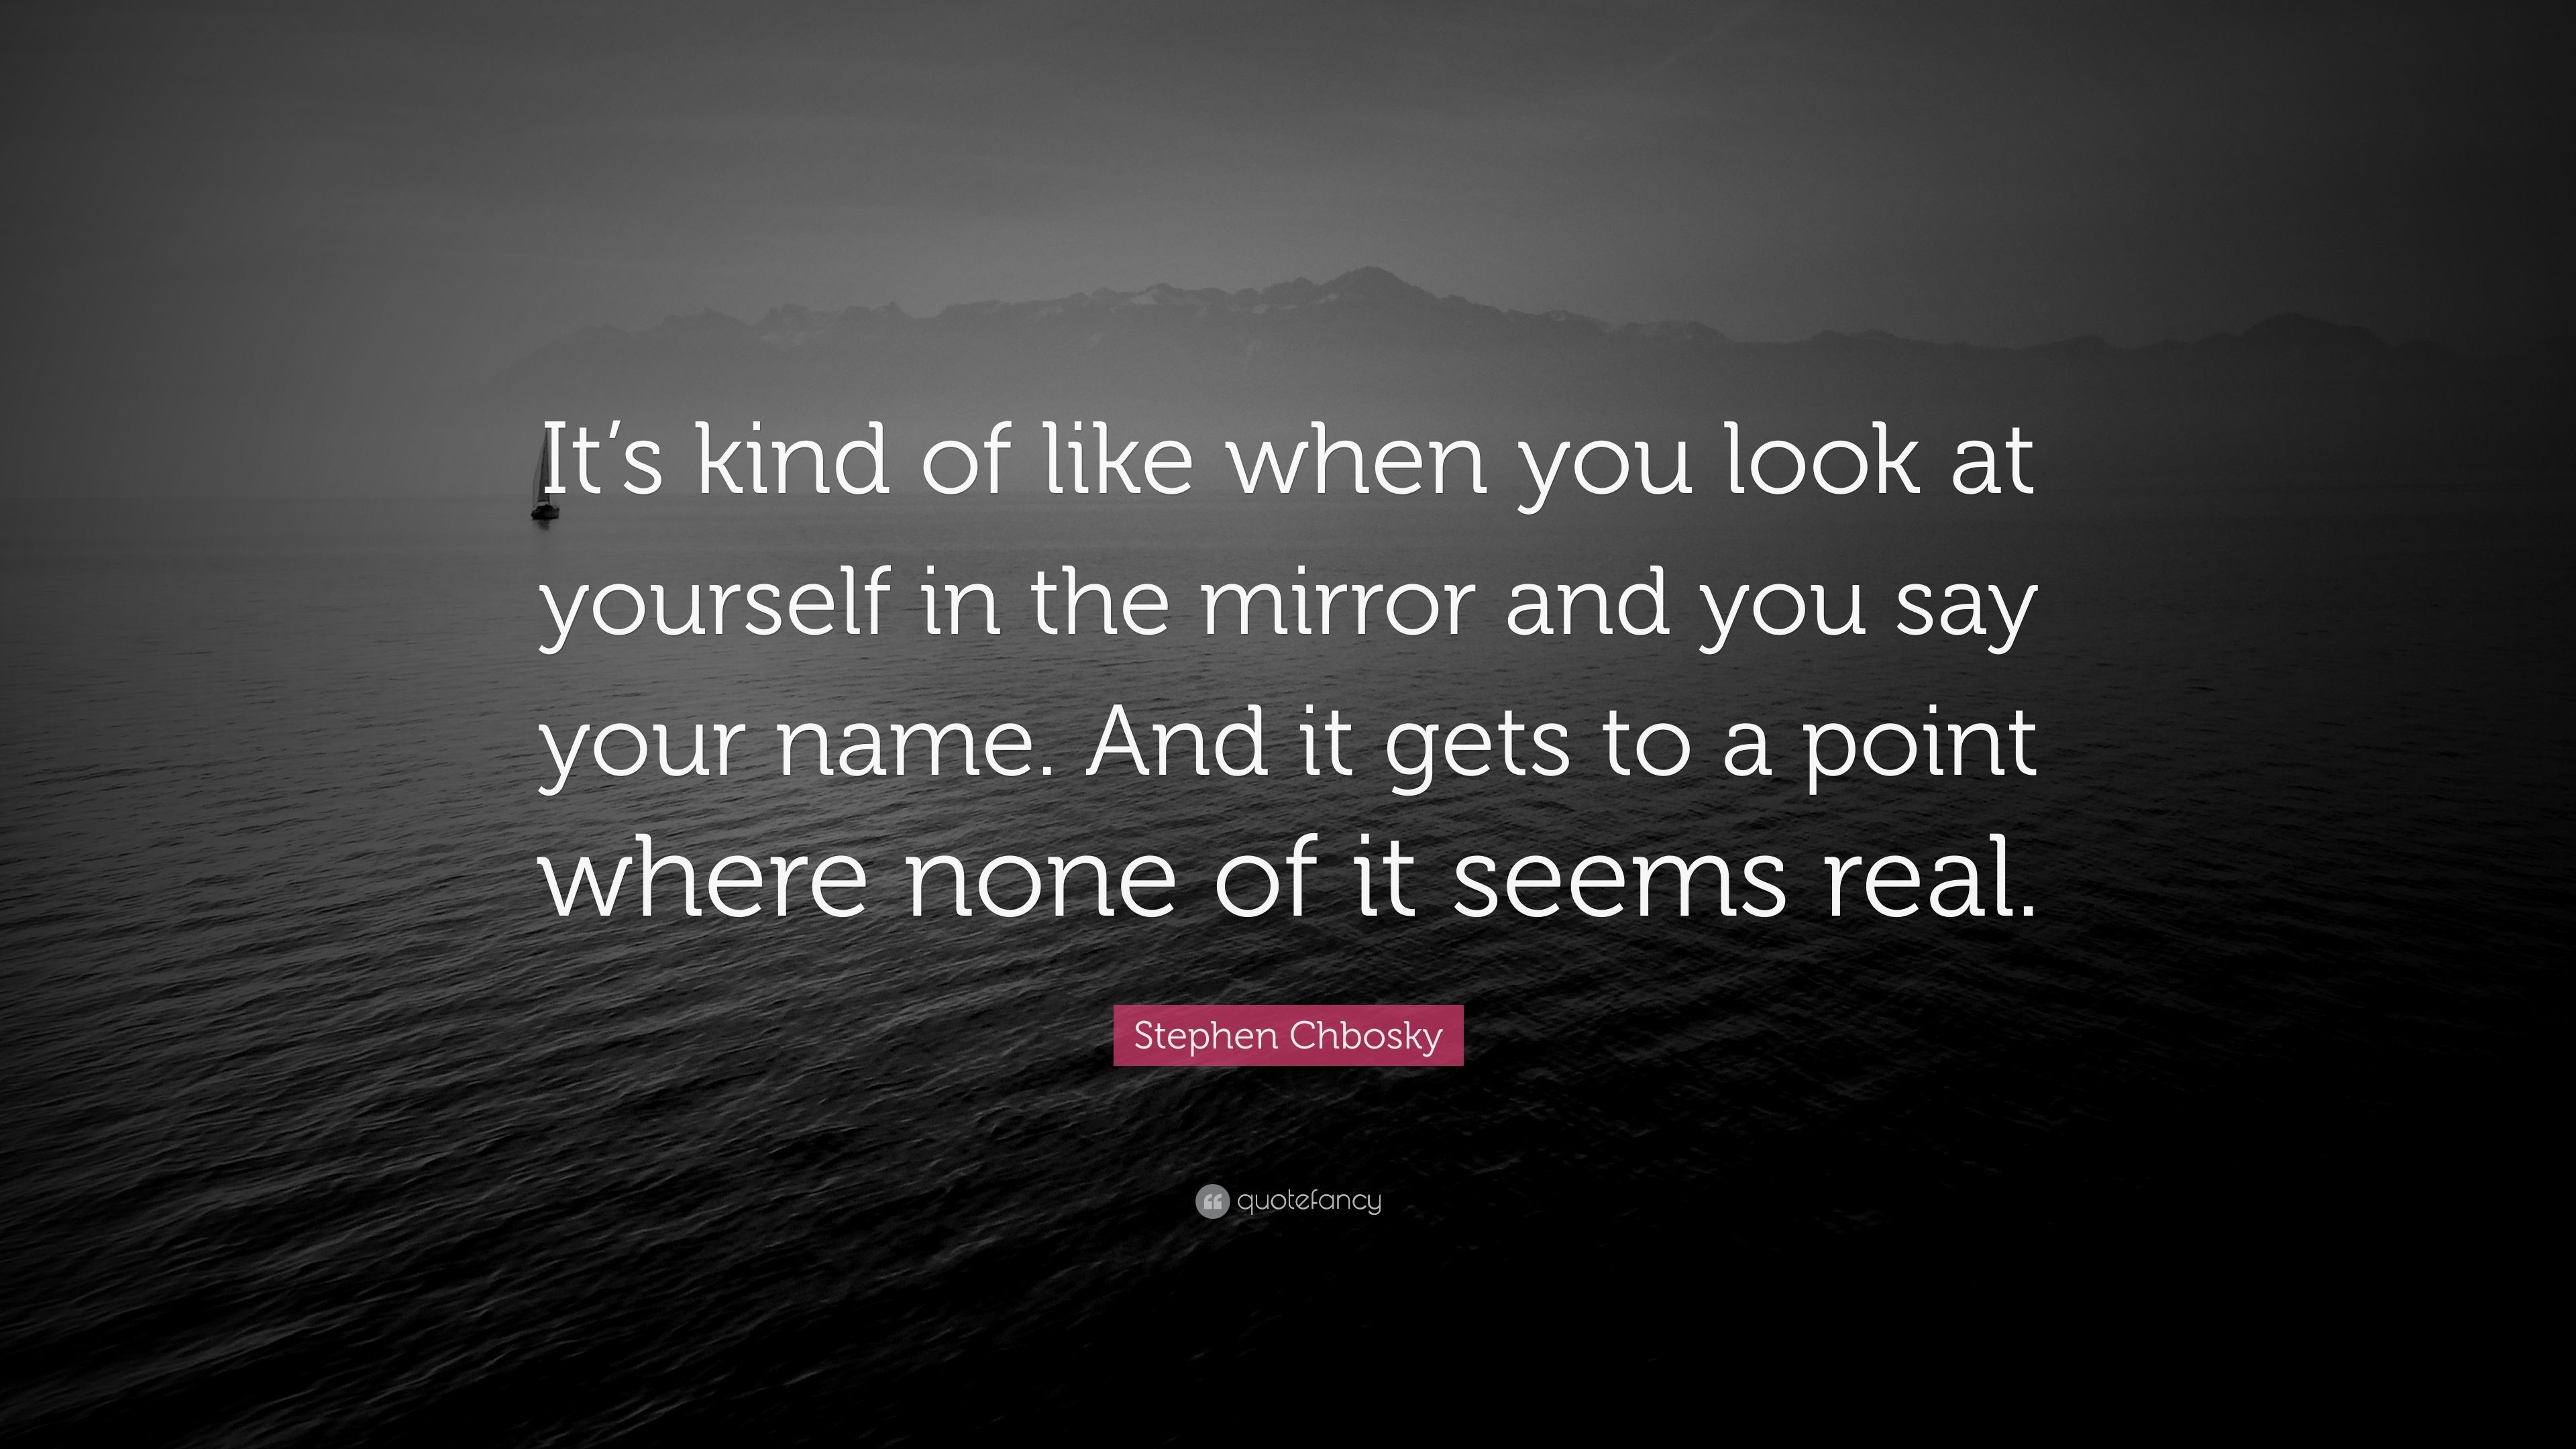 Stephen Chbosky Quote Its kind of like when you look at yourself in the